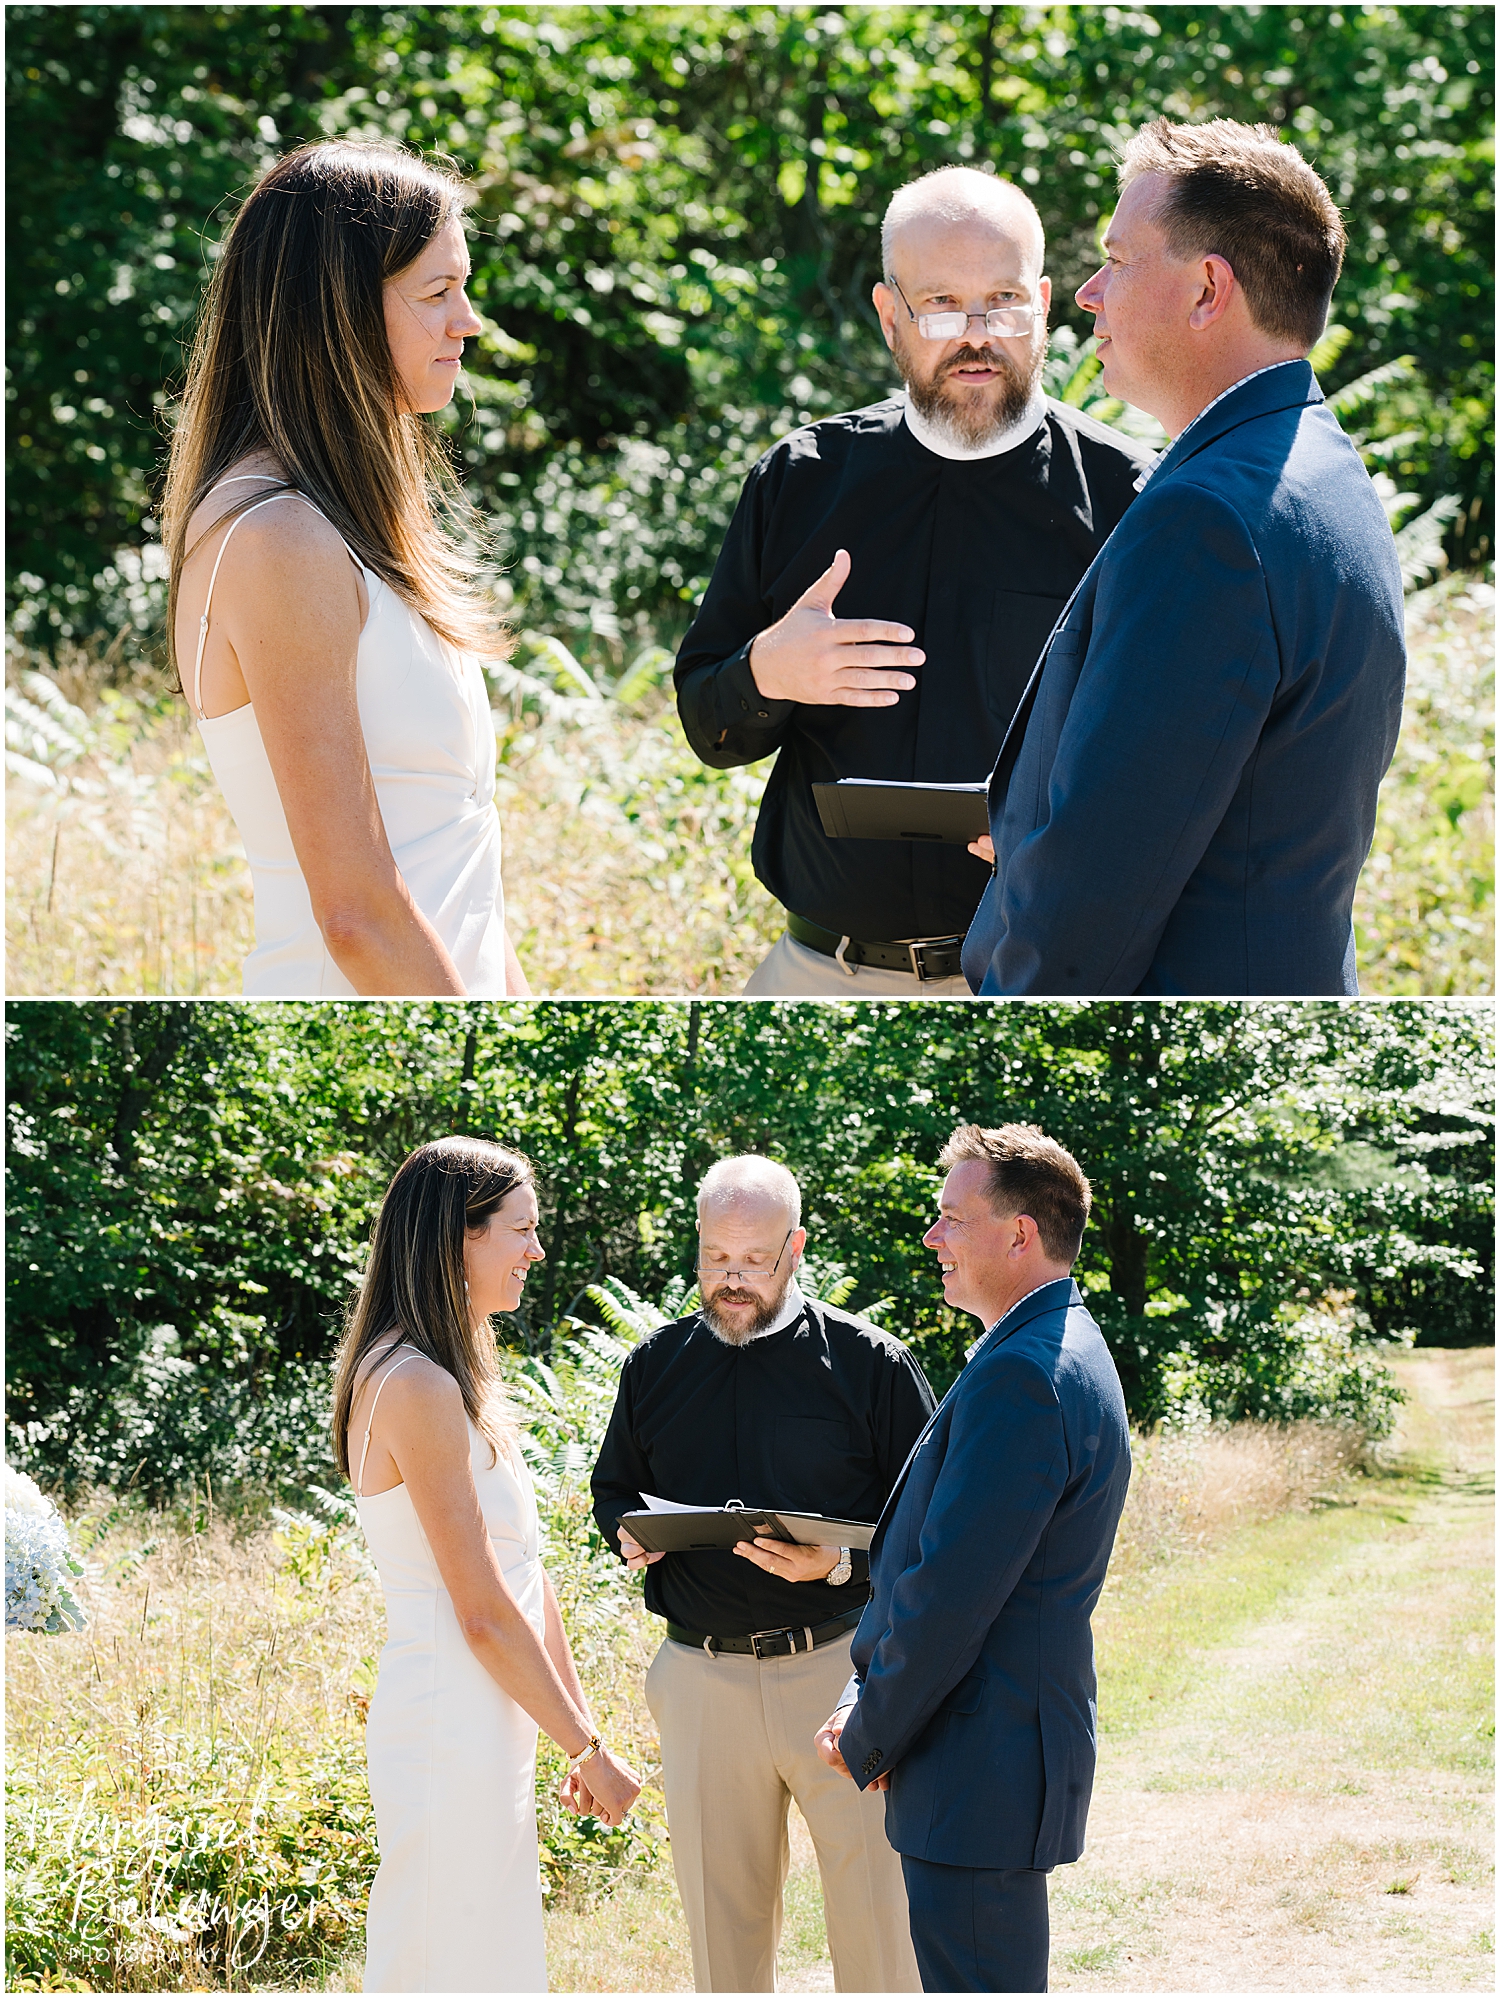 A bride and groom stand in front of their wedding officiant during their sunny outdoor ceremony.